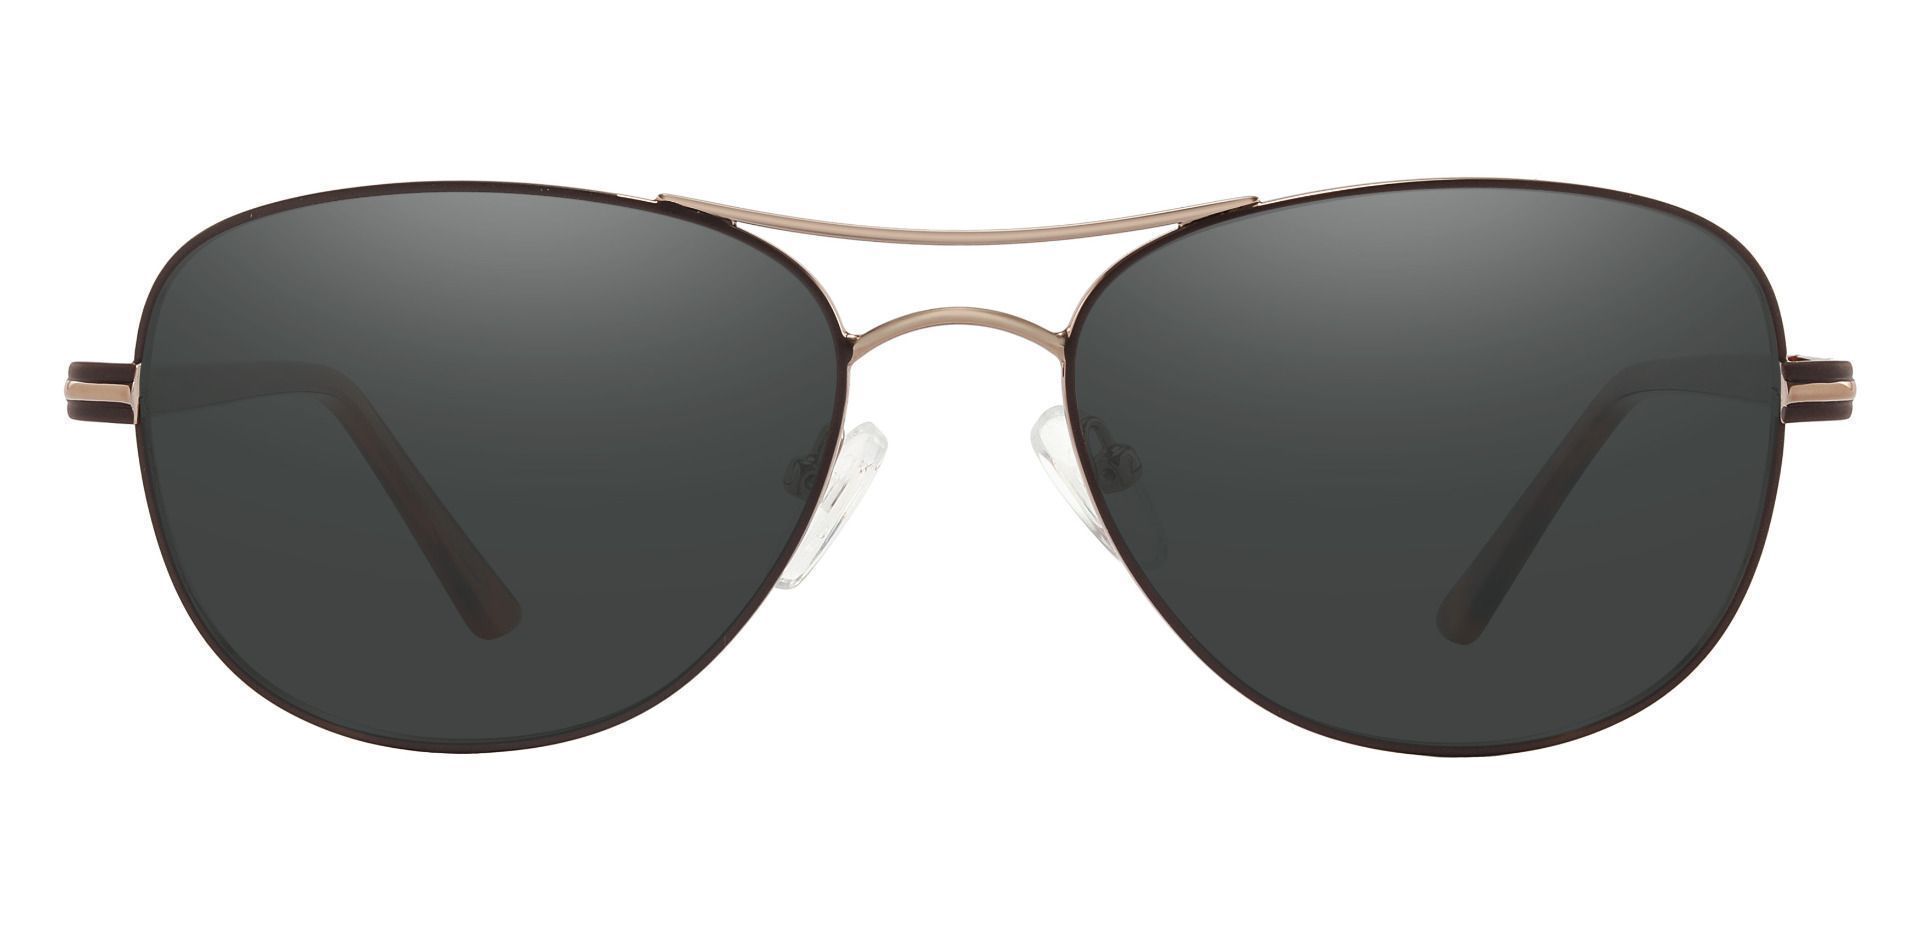 Reeves Aviator Prescription Sunglasses - Brown Frame With Gray Lenses ...